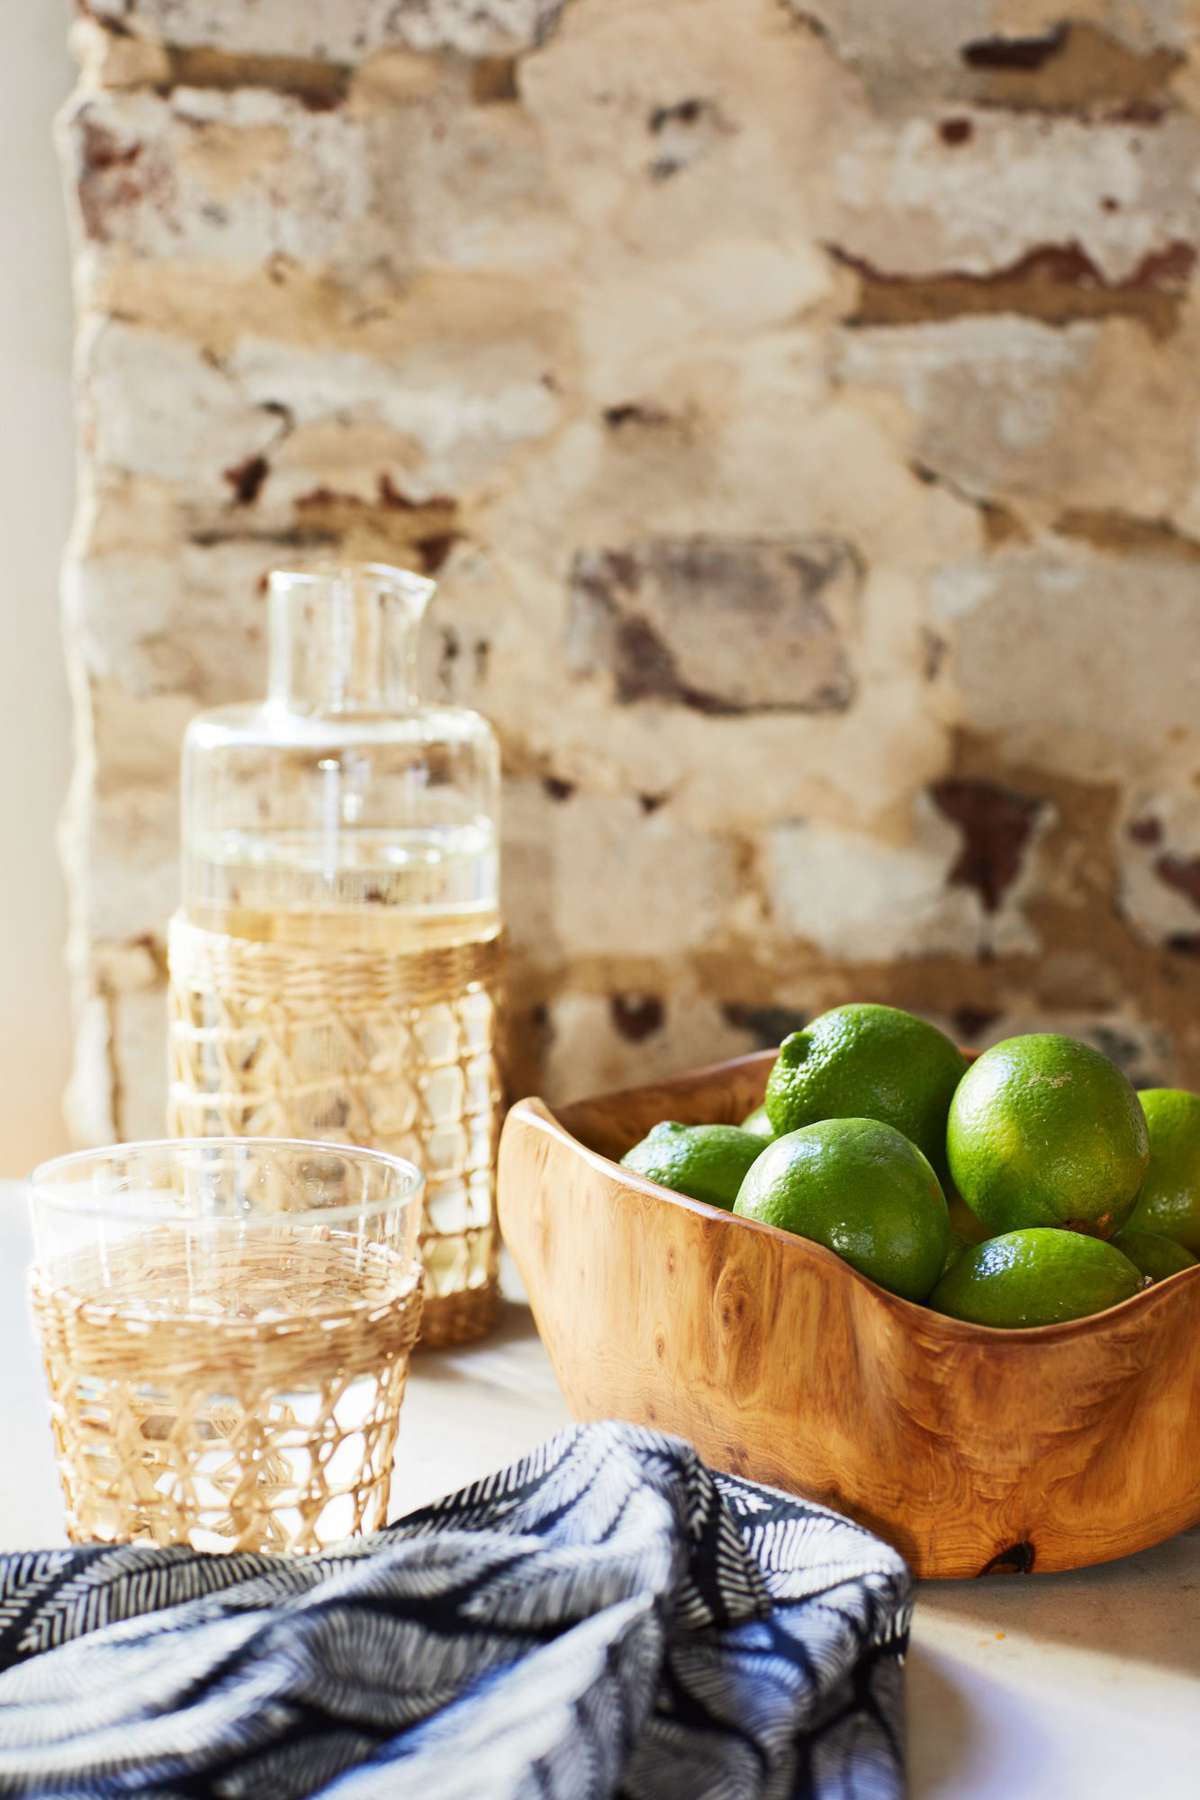 Bowl of limes and water glasses on counter against brick wall